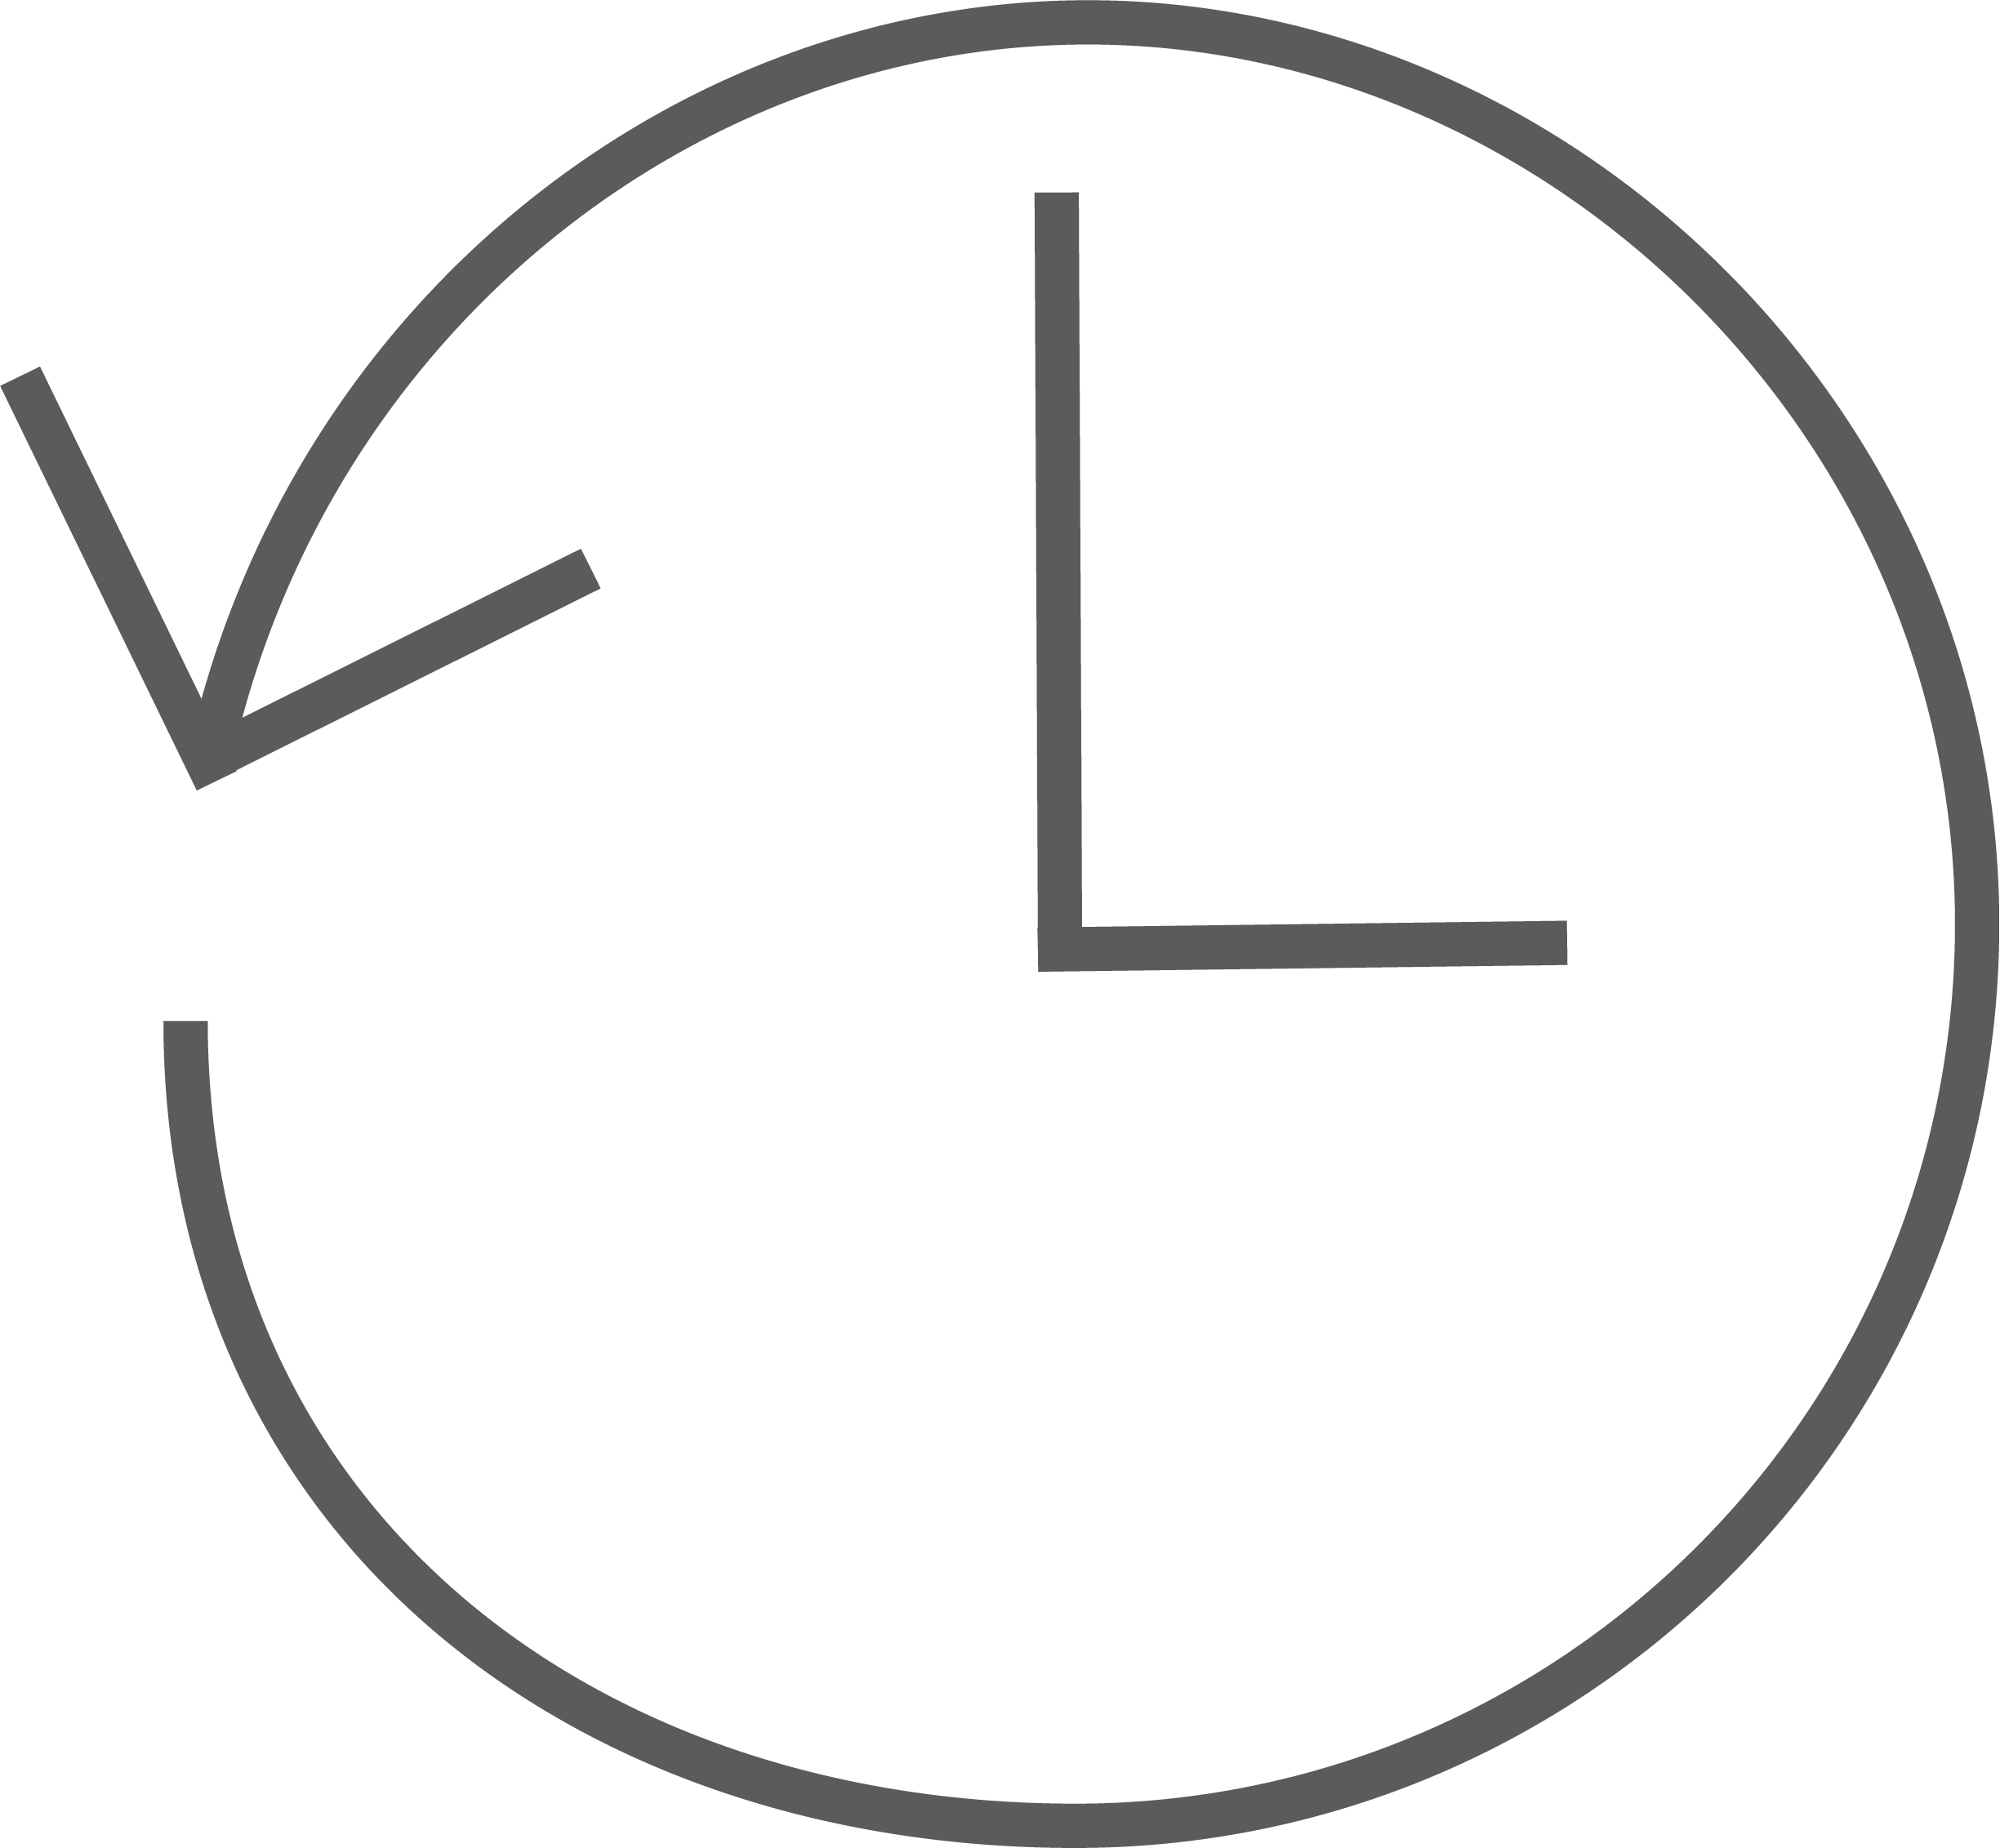 A clock with an arrow sticking out of the outer ring